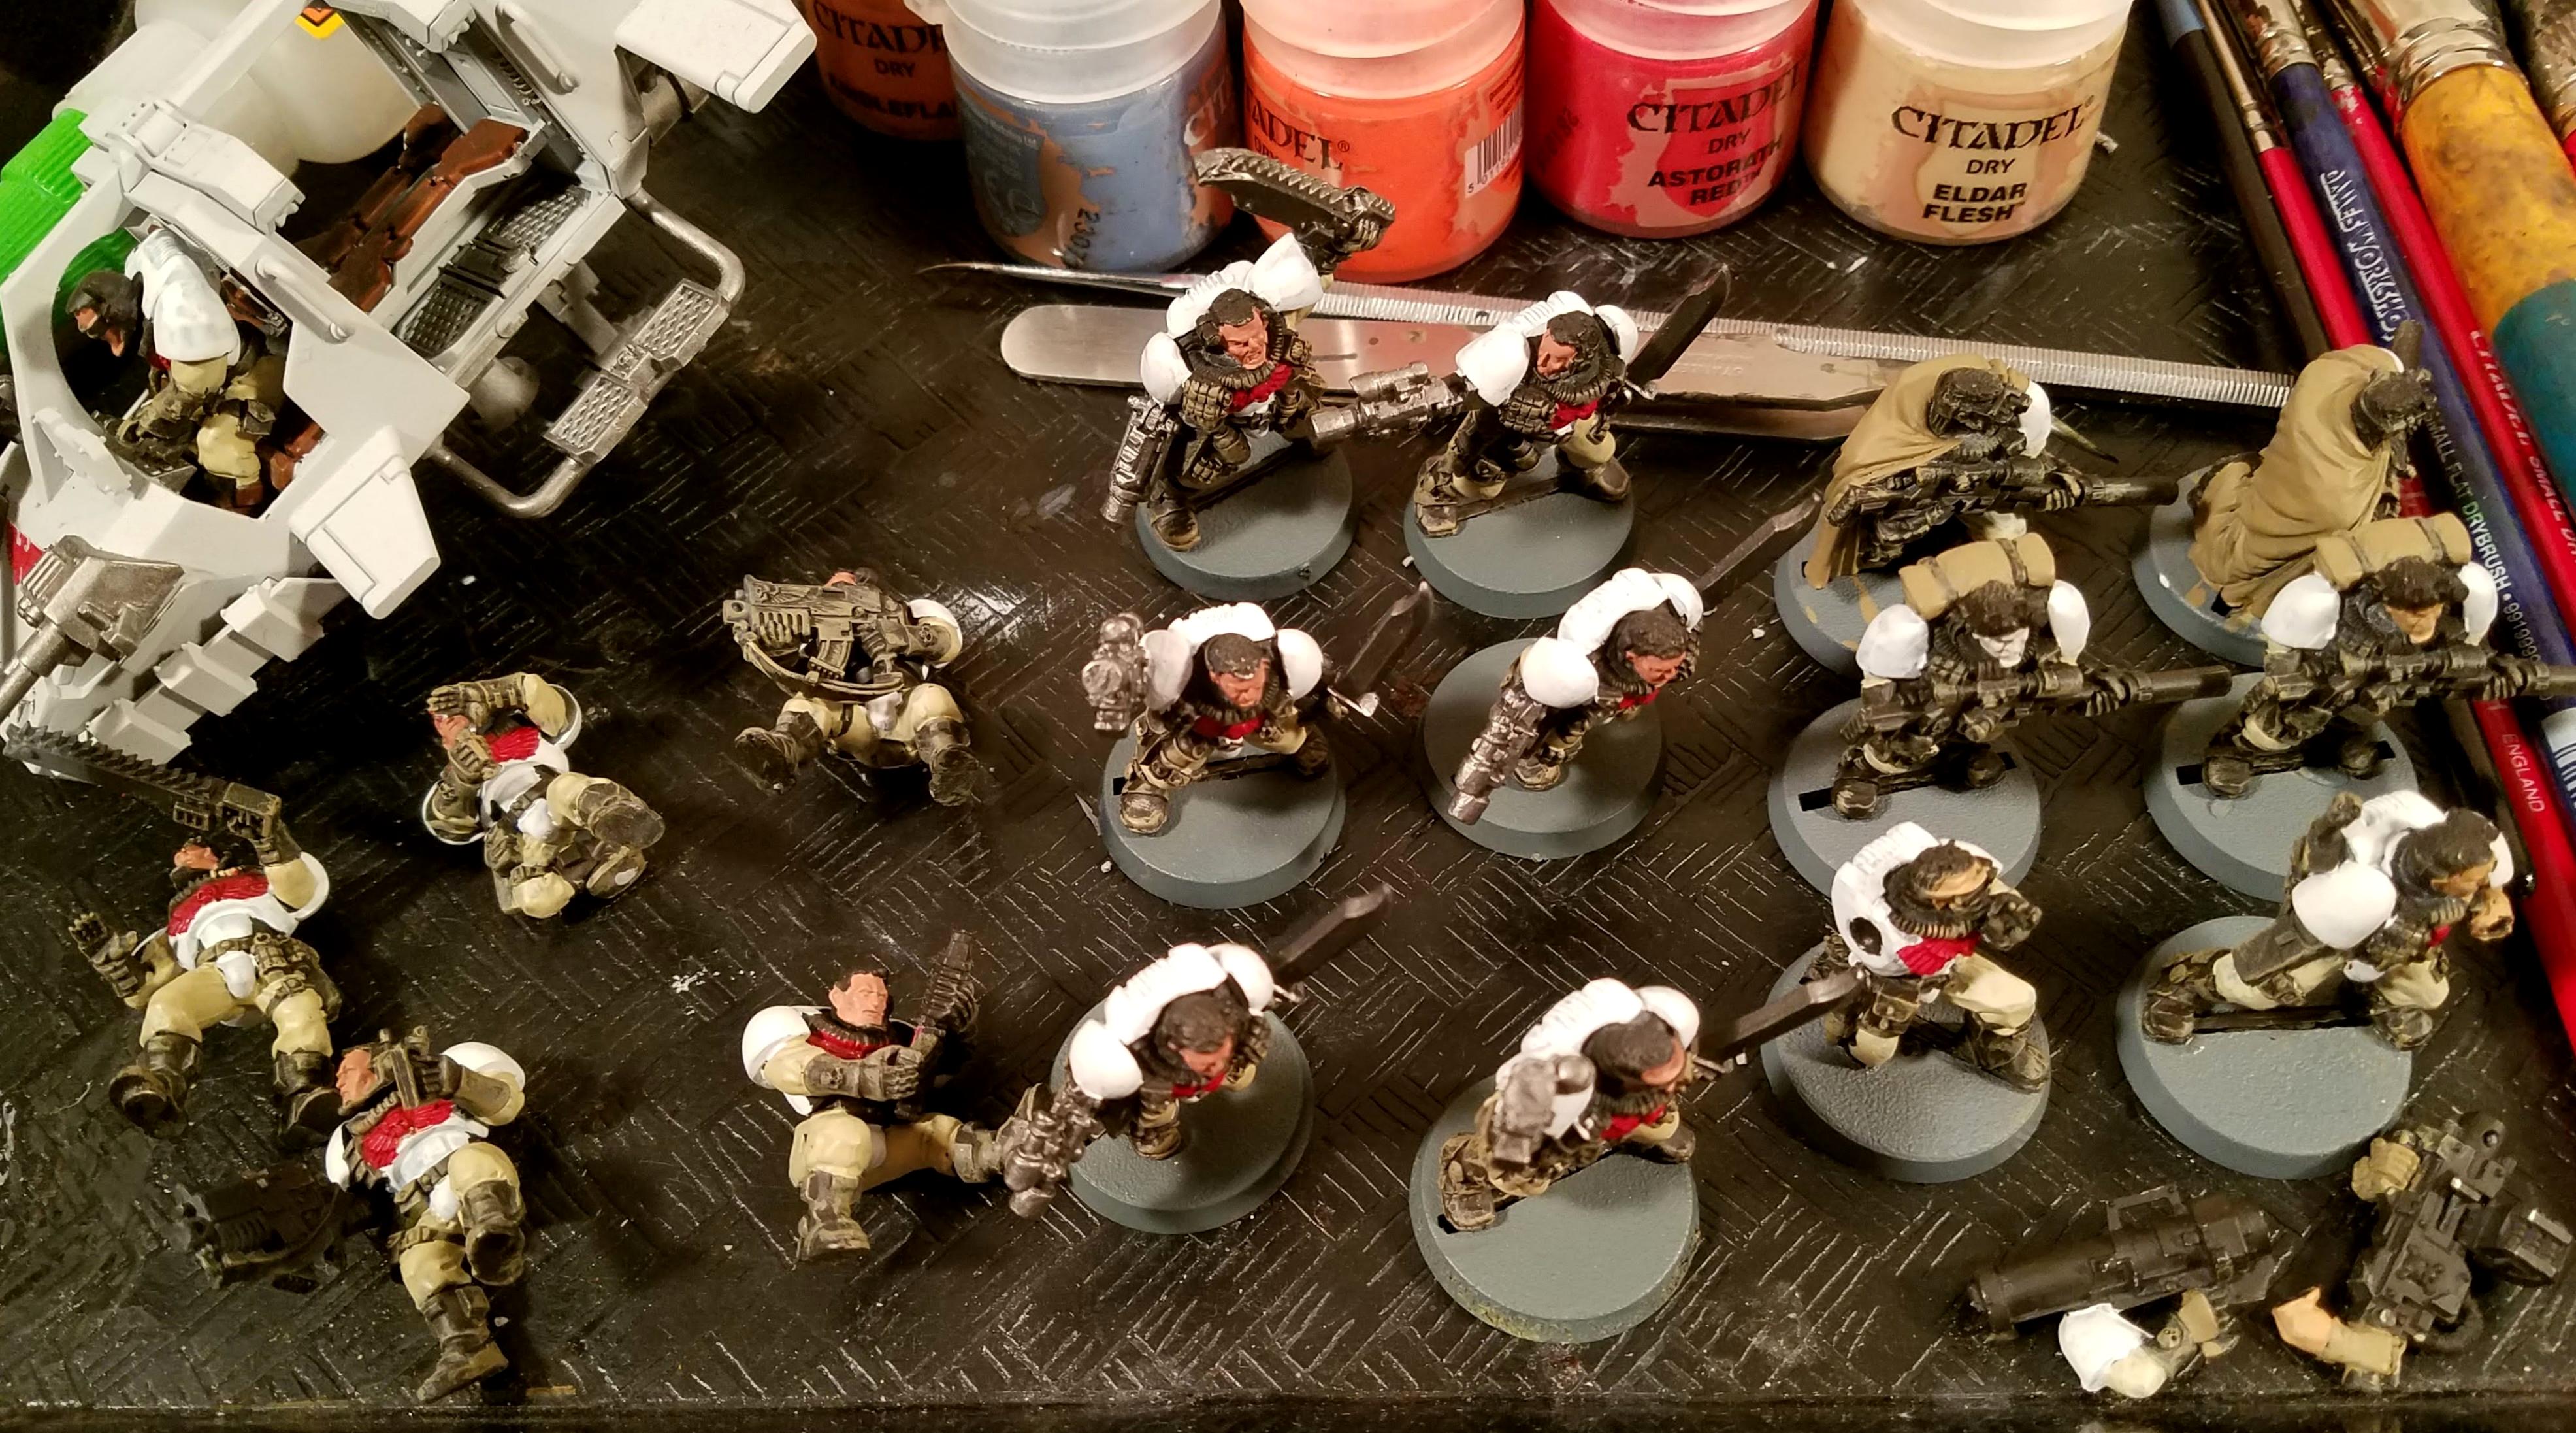 A Battalion's worth of White Scars scouts, including the passengers from the Storm who can disembark onto magnetic bases